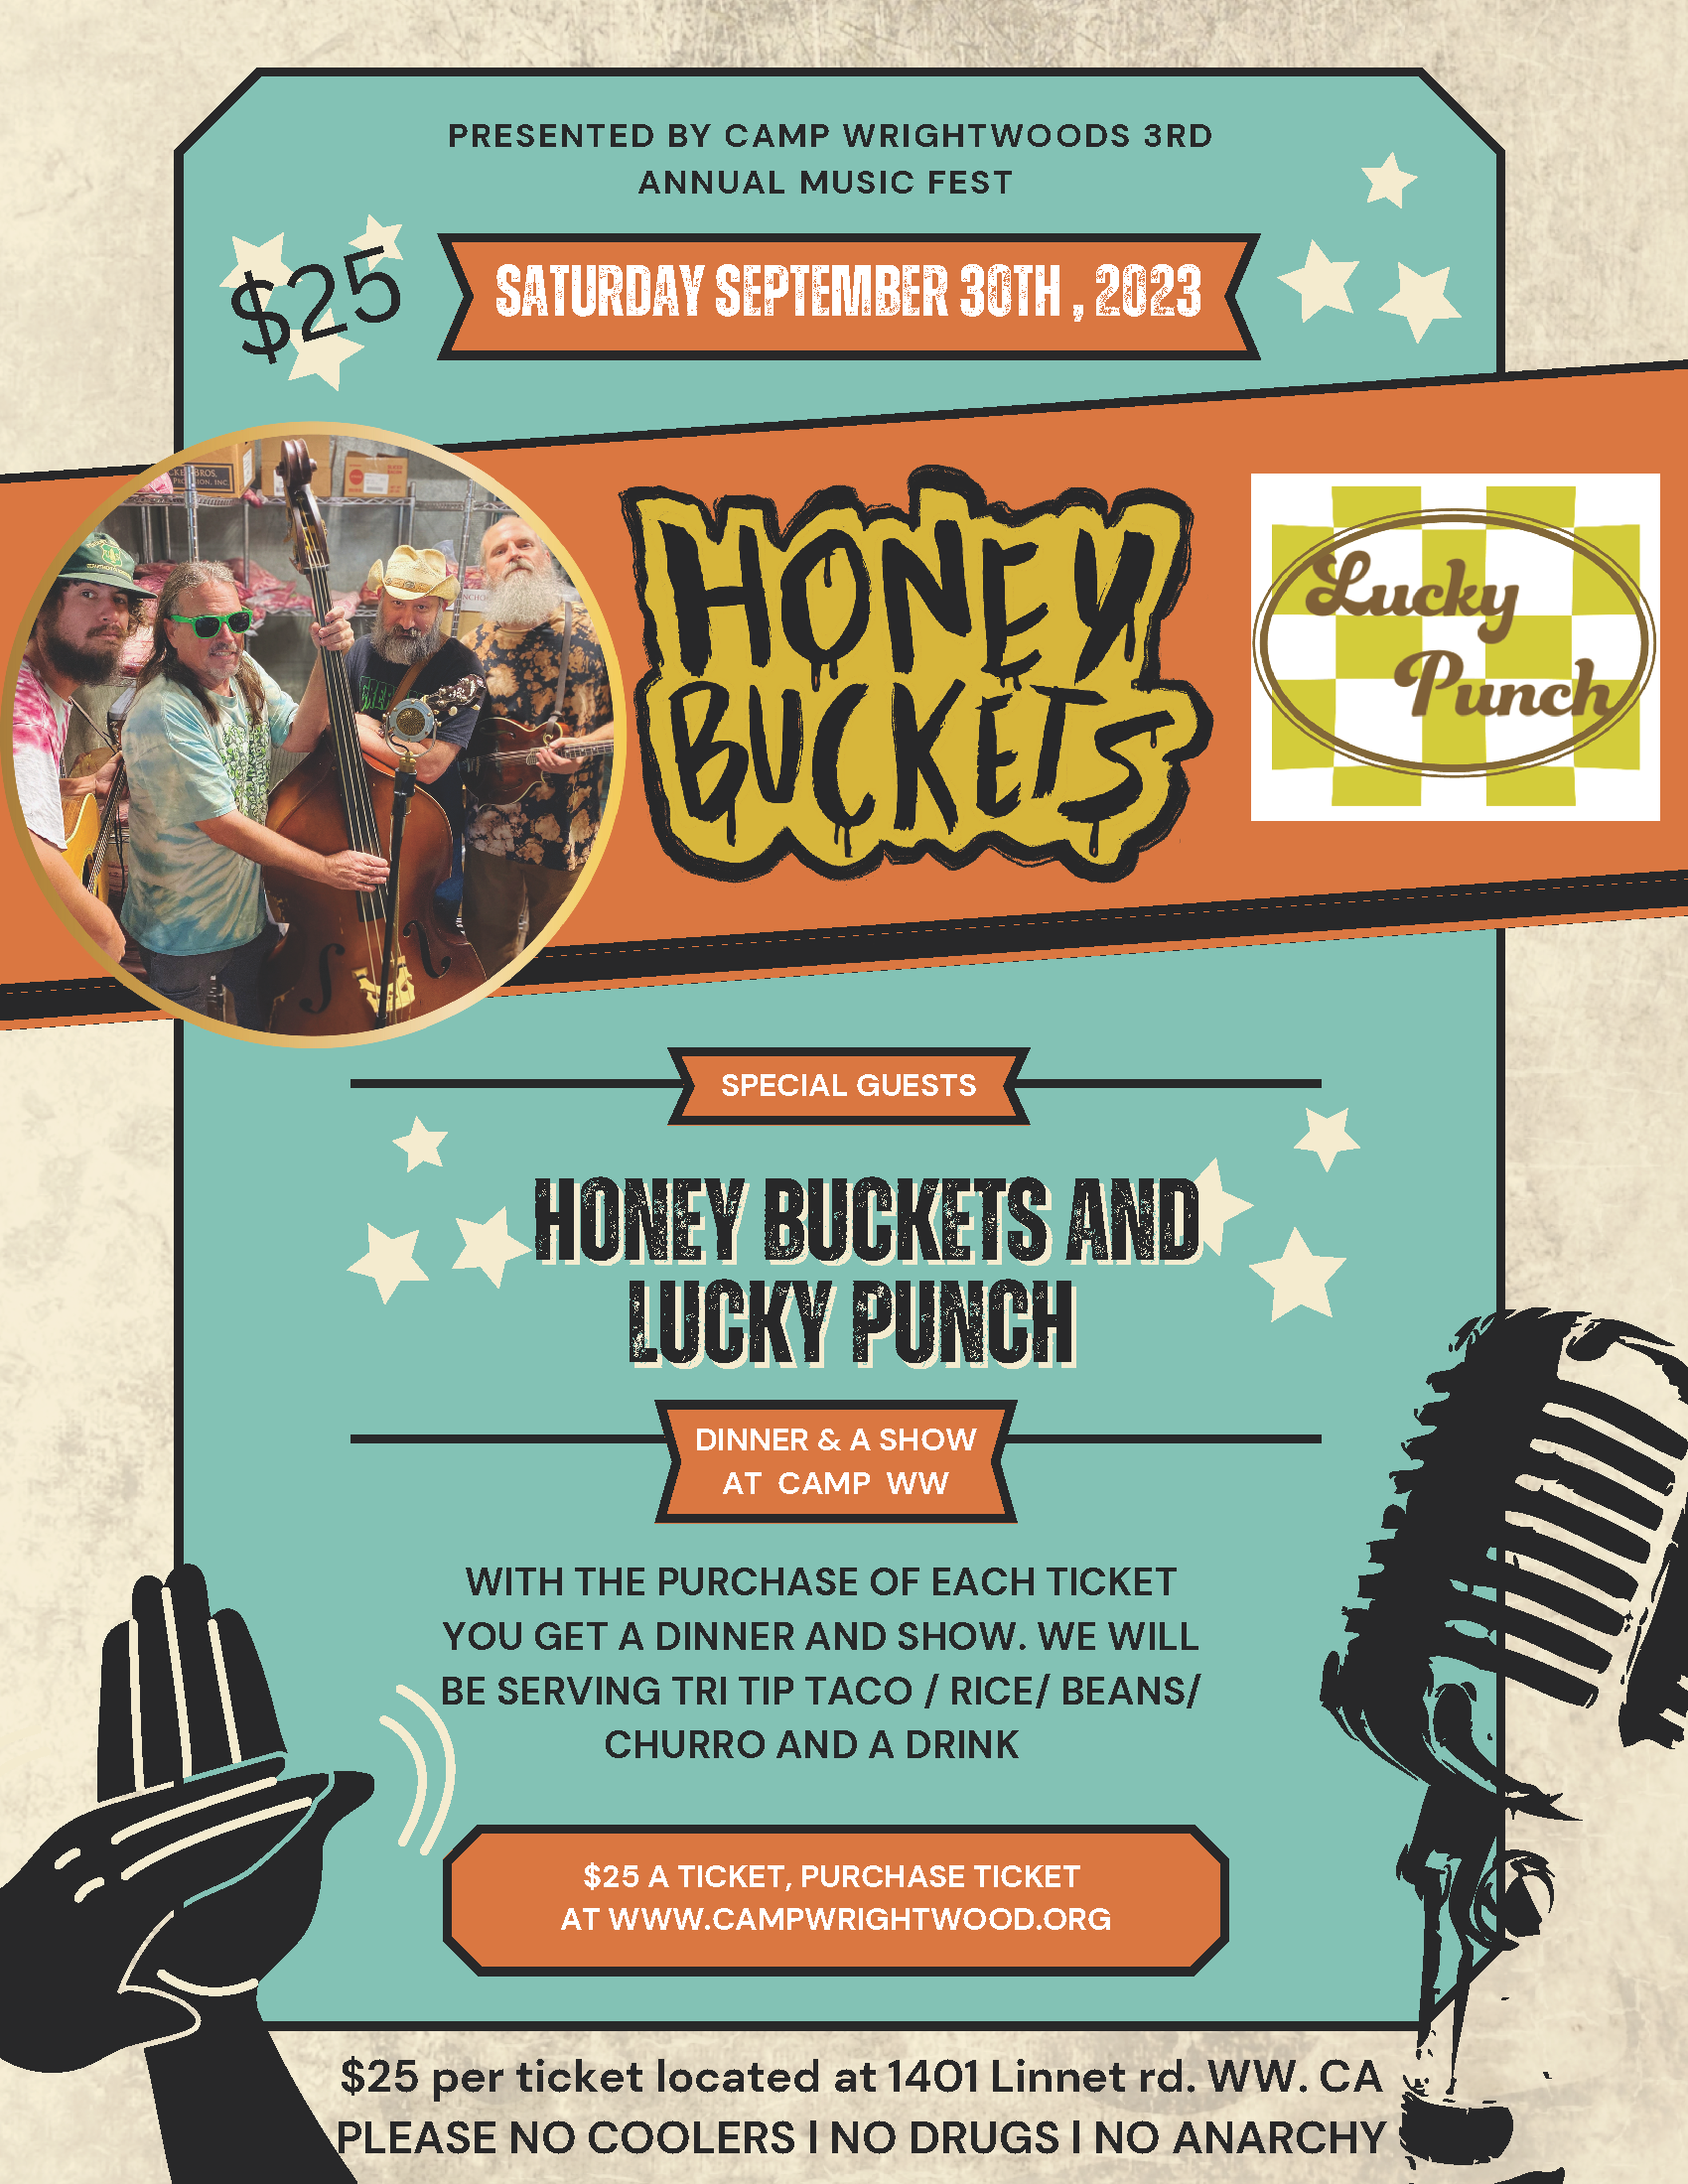 Camp Wrightwood 3rd Annual Music Fest - Honey Buckets & Lucky Punch